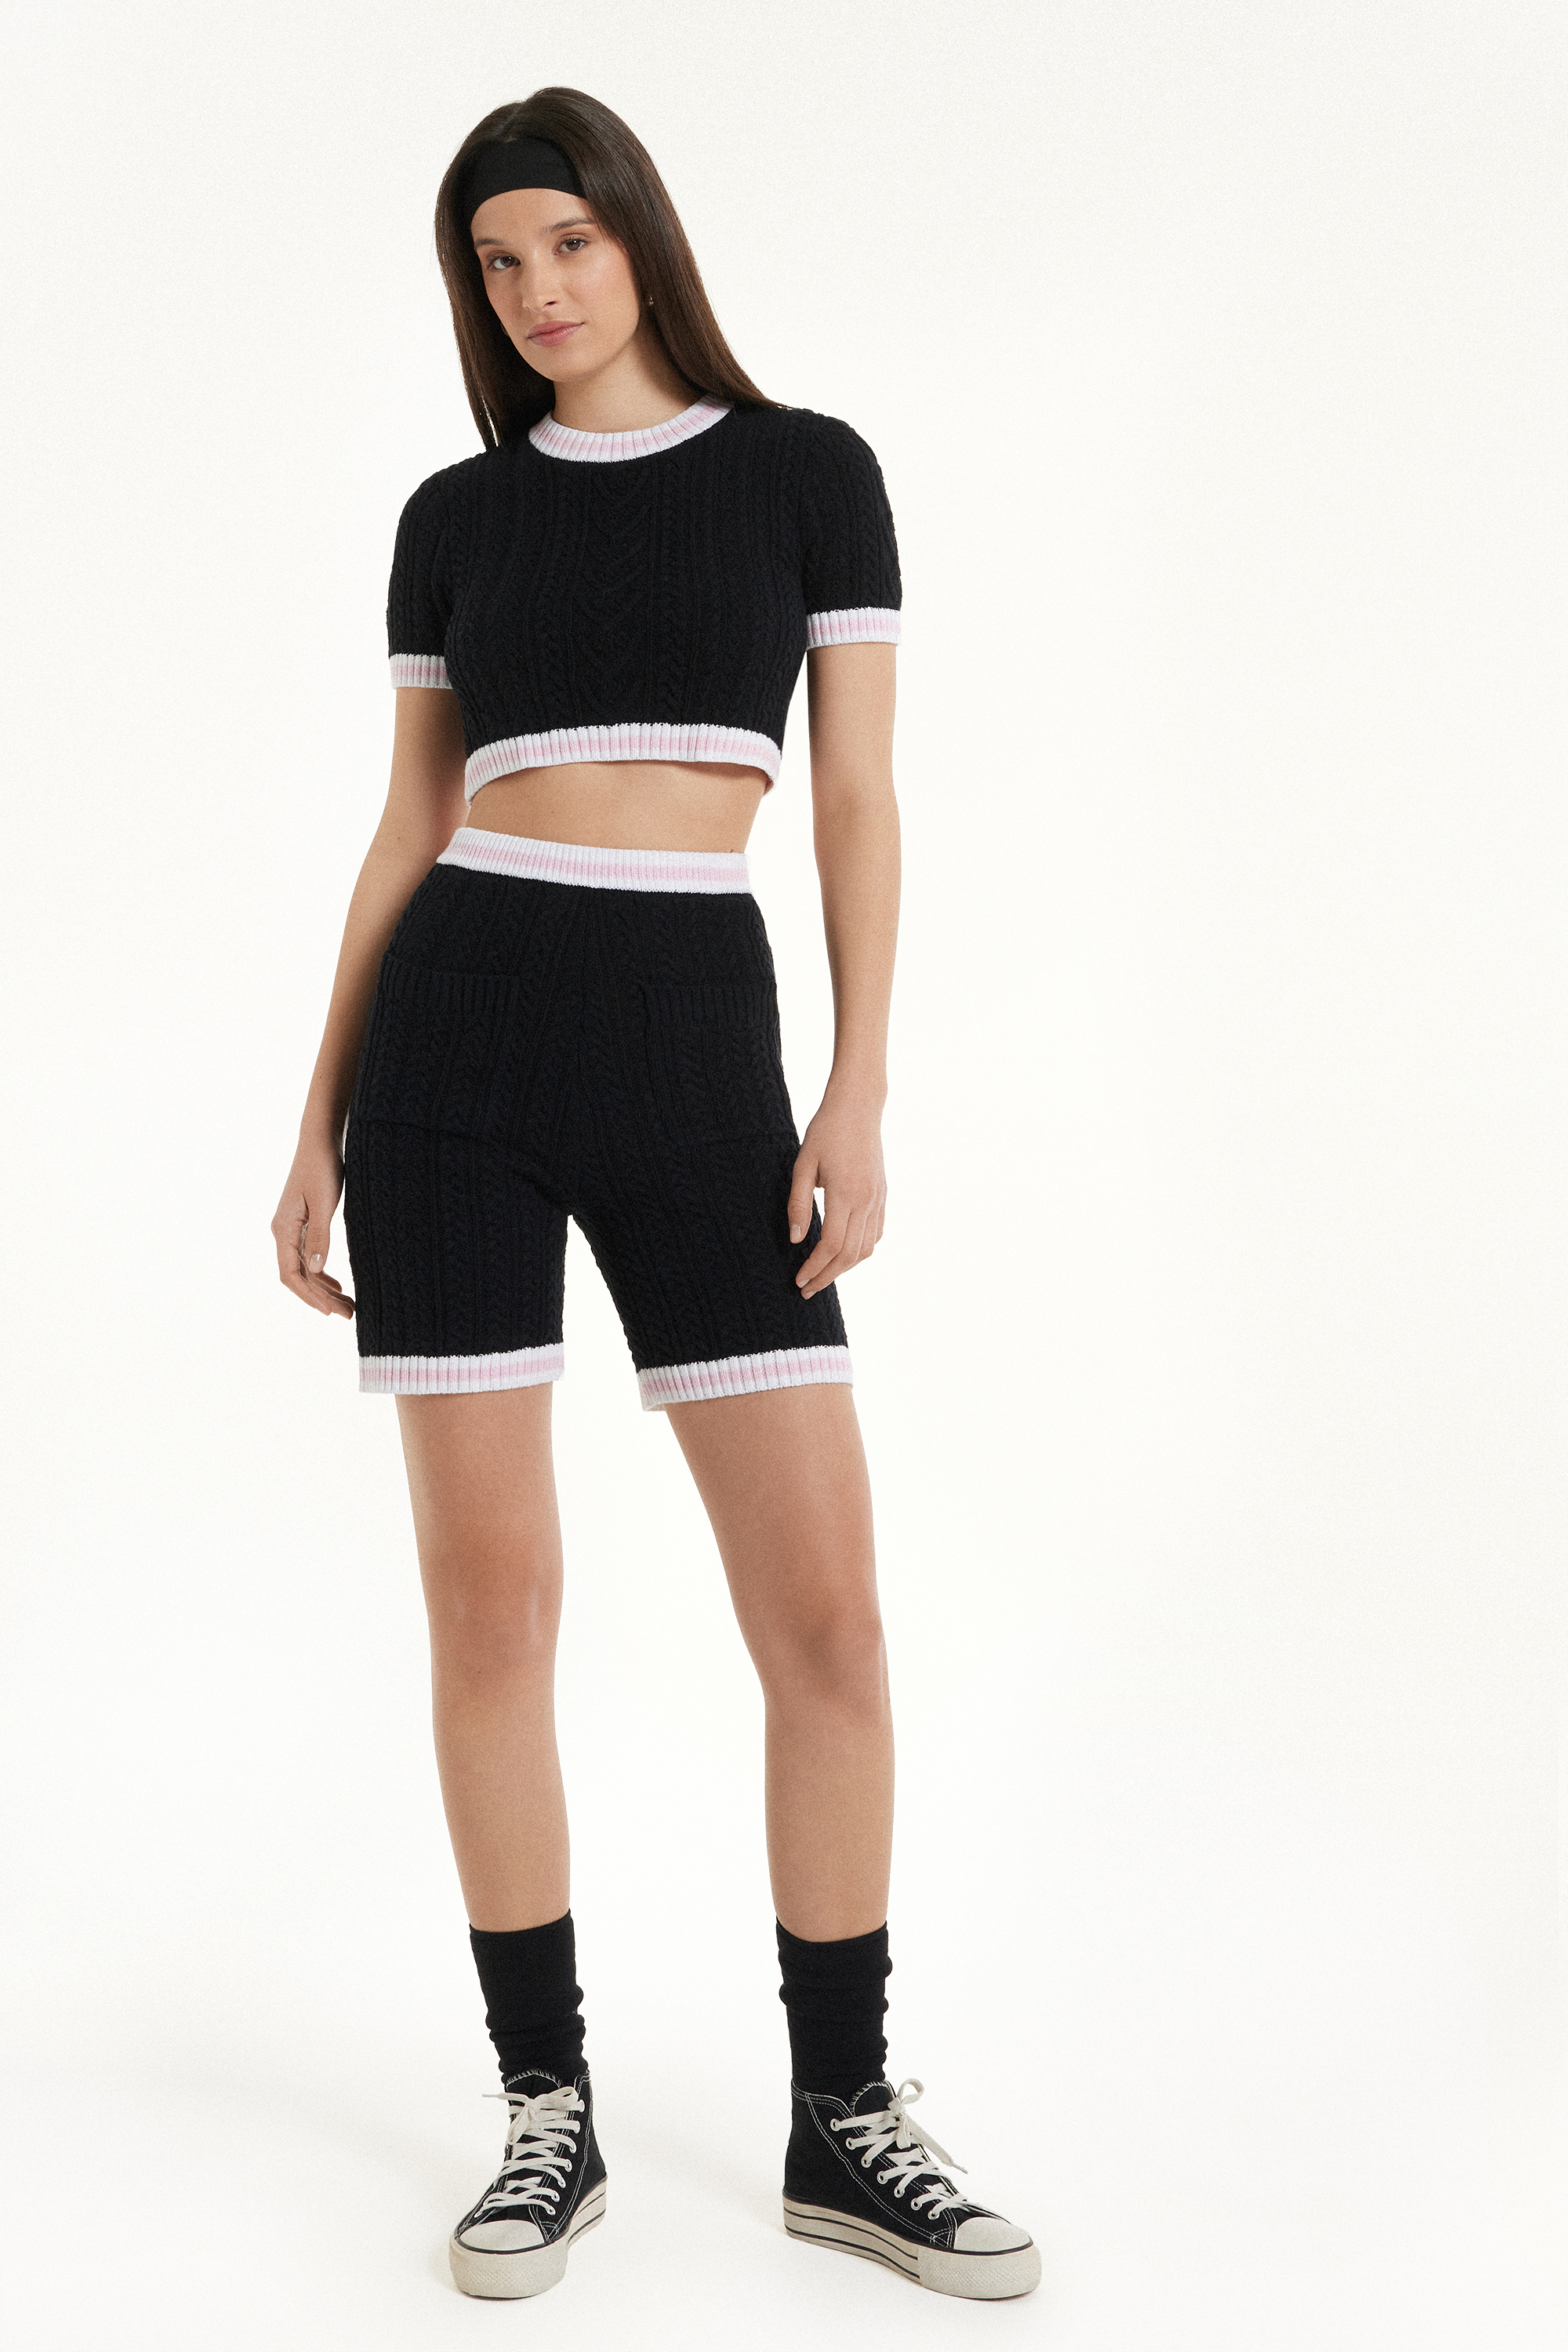 Full-Fashioned Open Knit Fabric Shorts with Pockets